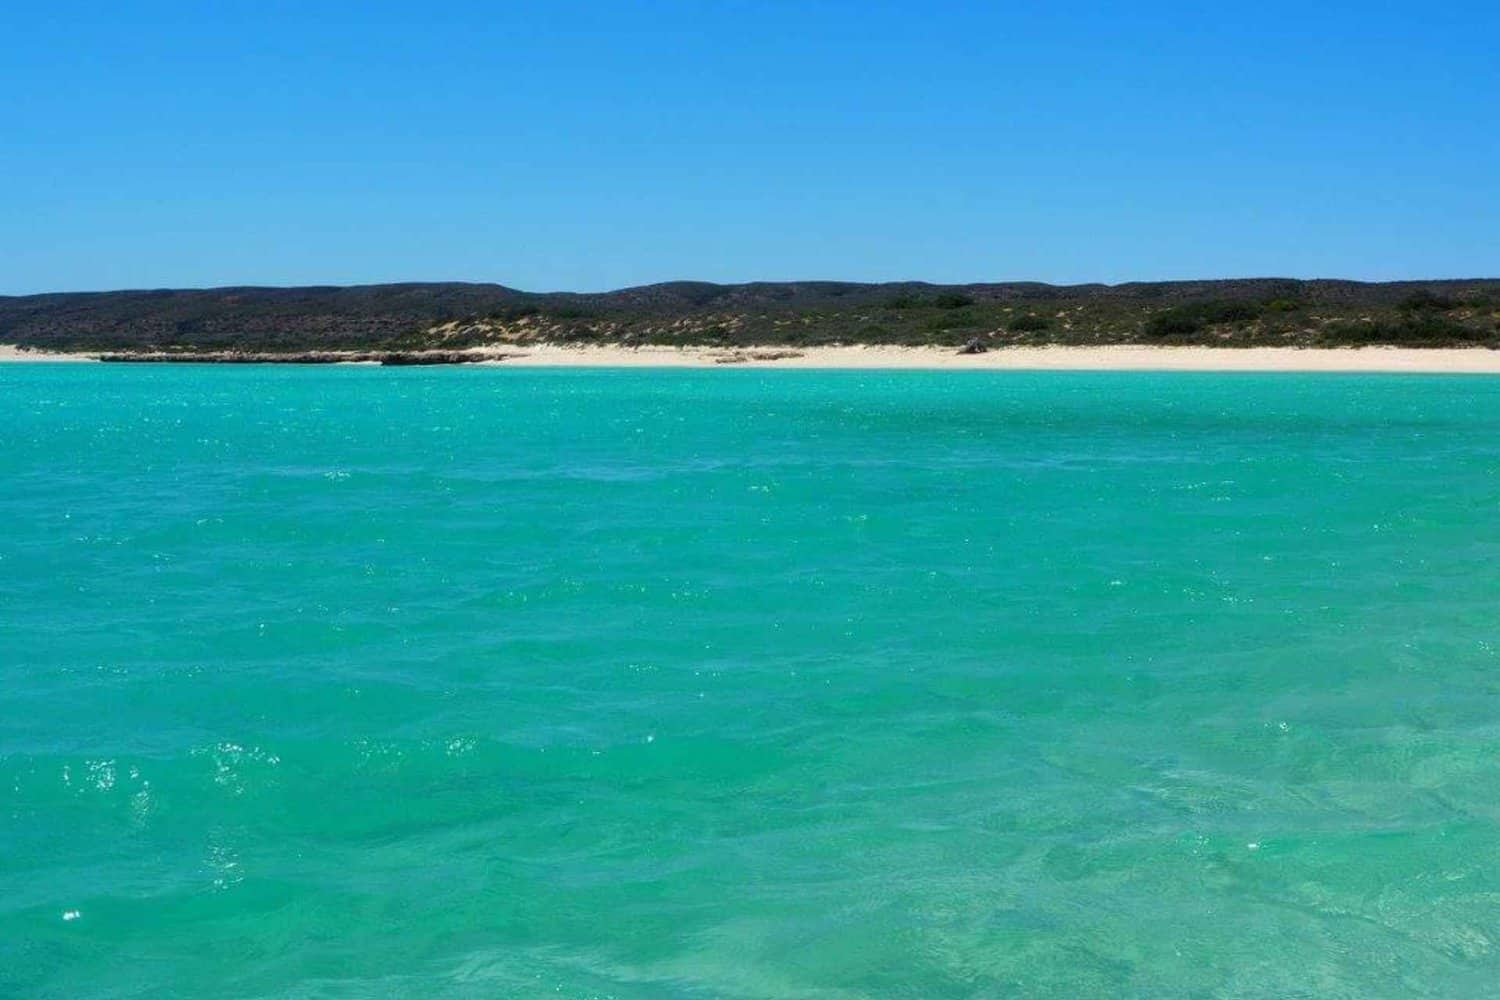 Scenic ocean view at Jurien Bay, showcasing the beautiful waters where sea lion tours take place during the Perth to Exmouth adventure, offering visitors a chance to encounter majestic marine life up close